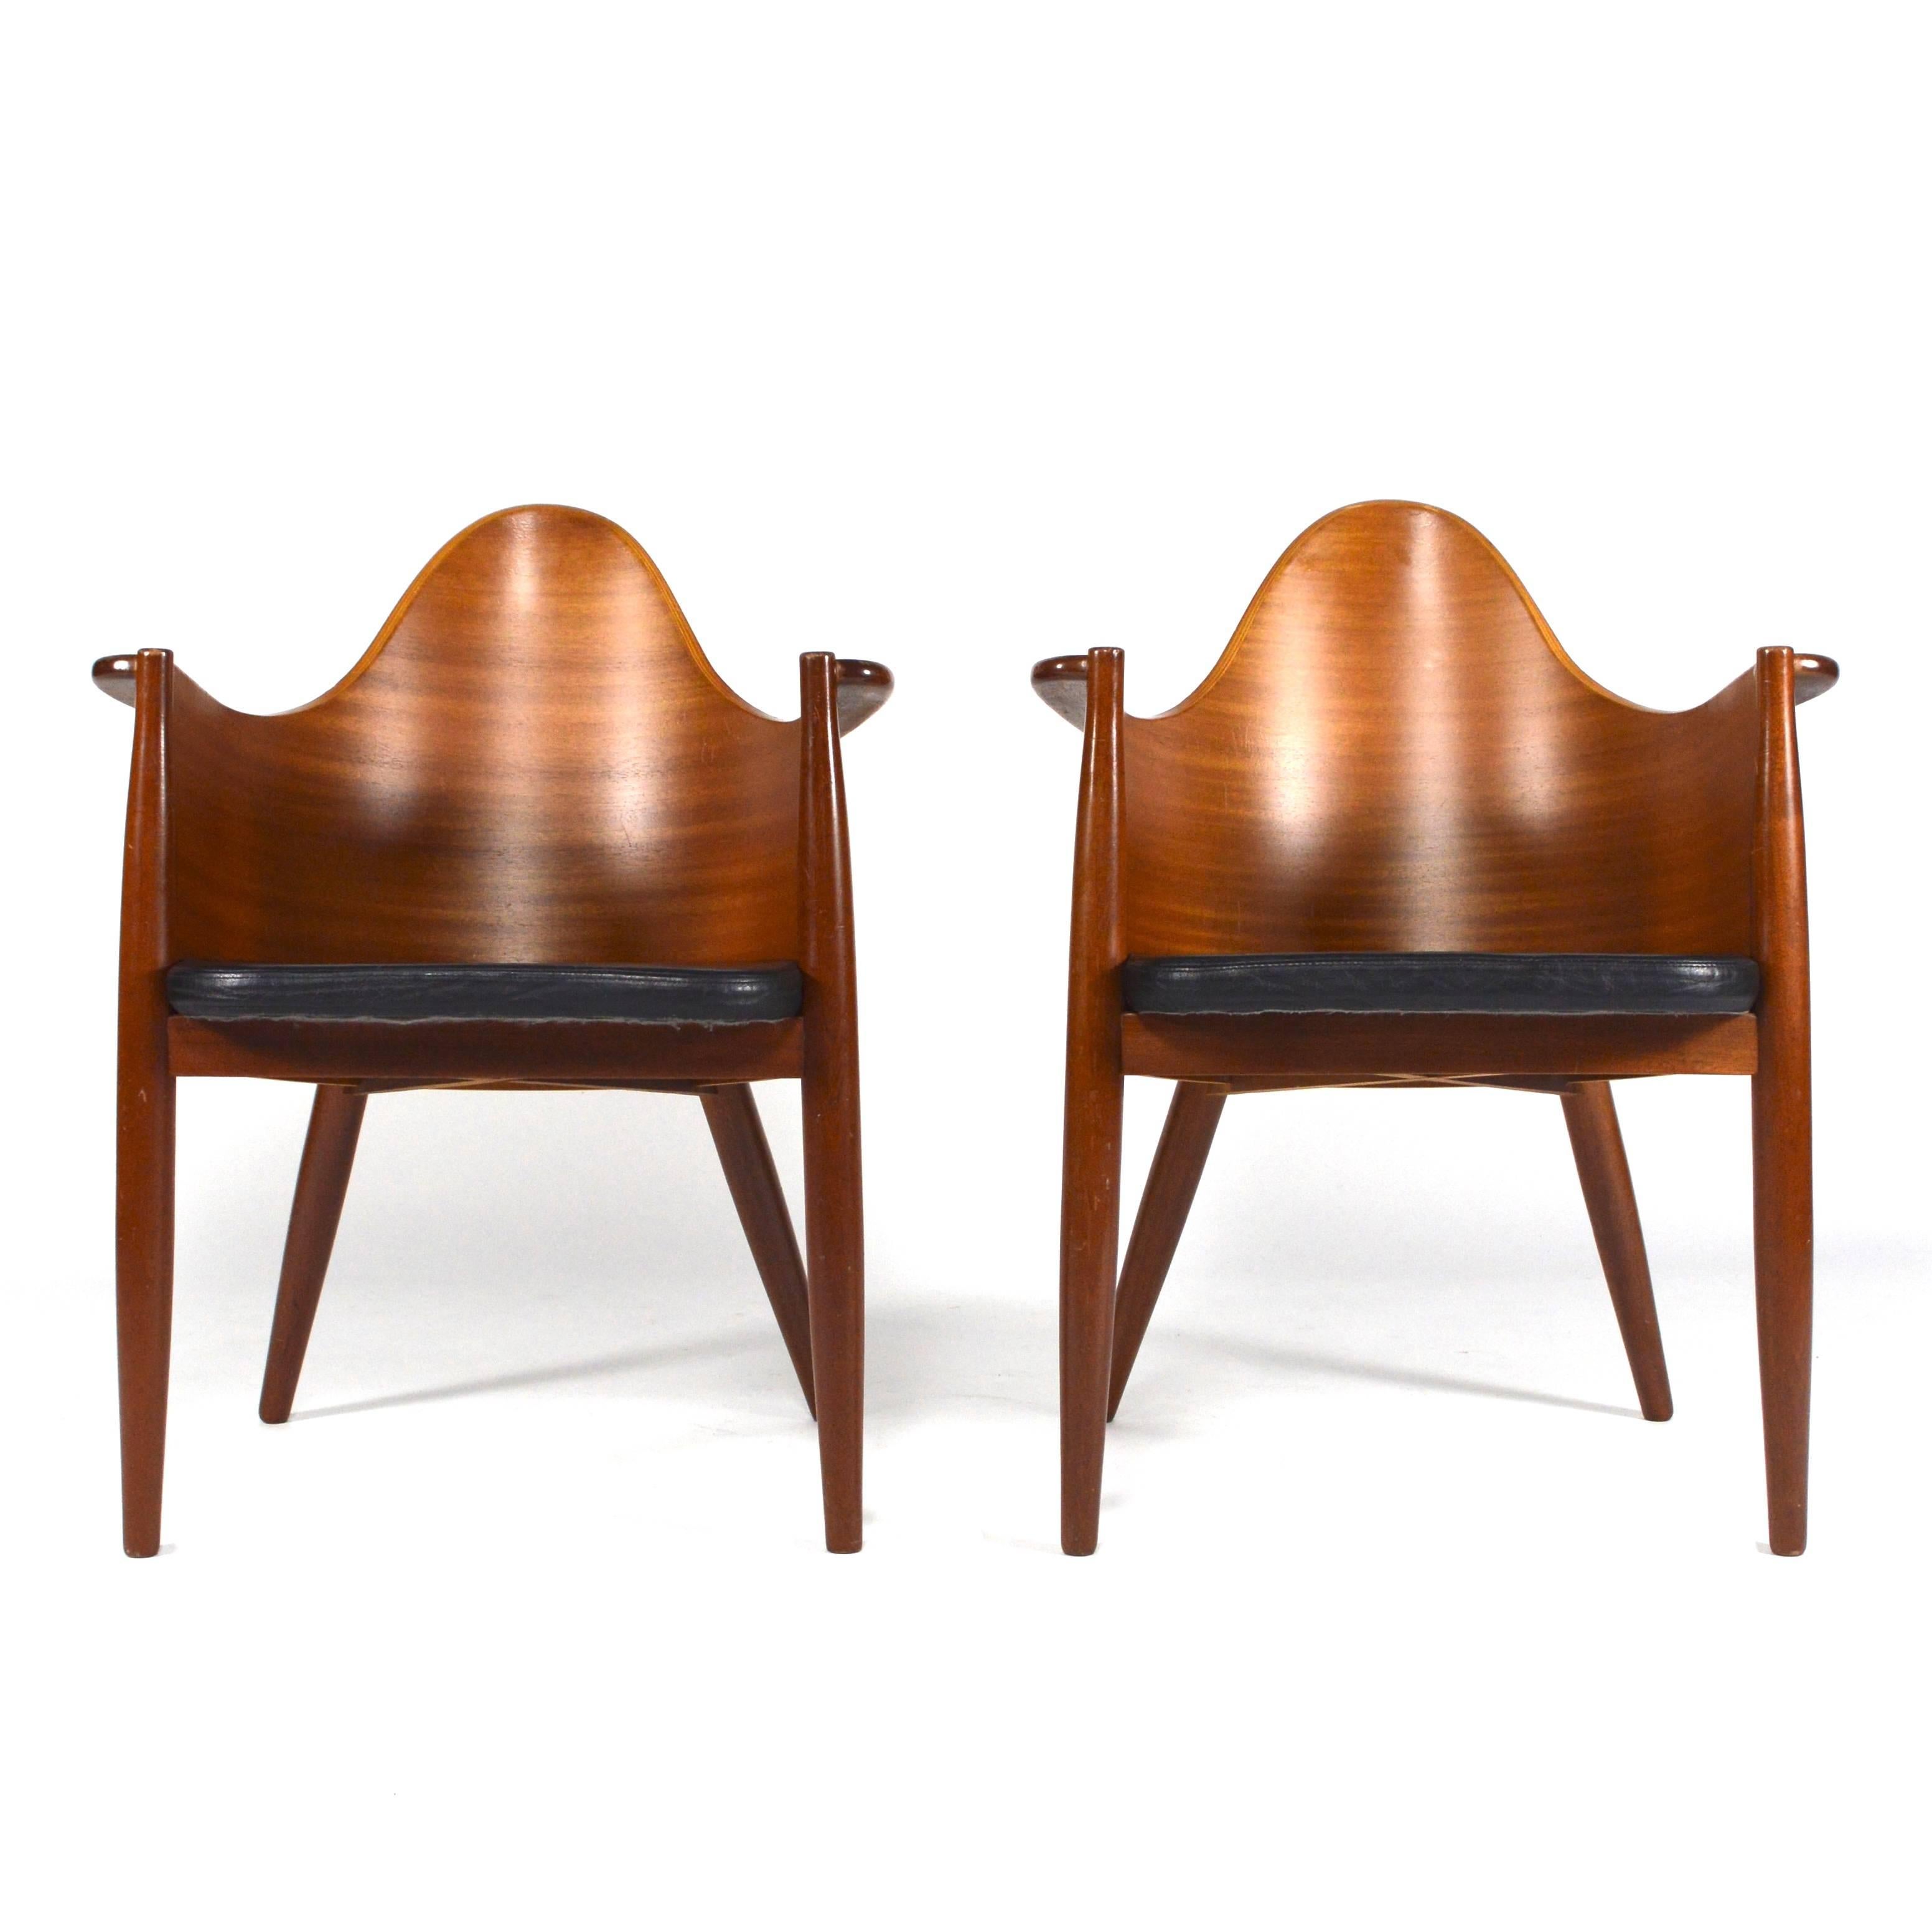 Very unique and absolutely gorgeous set of Teak plywood side / dining chairs from the 1950-60's.
Solid Teak legs and armrests with a beautiful plywood back.
The chairs are in good condition with normal age related signs of use and still with it's